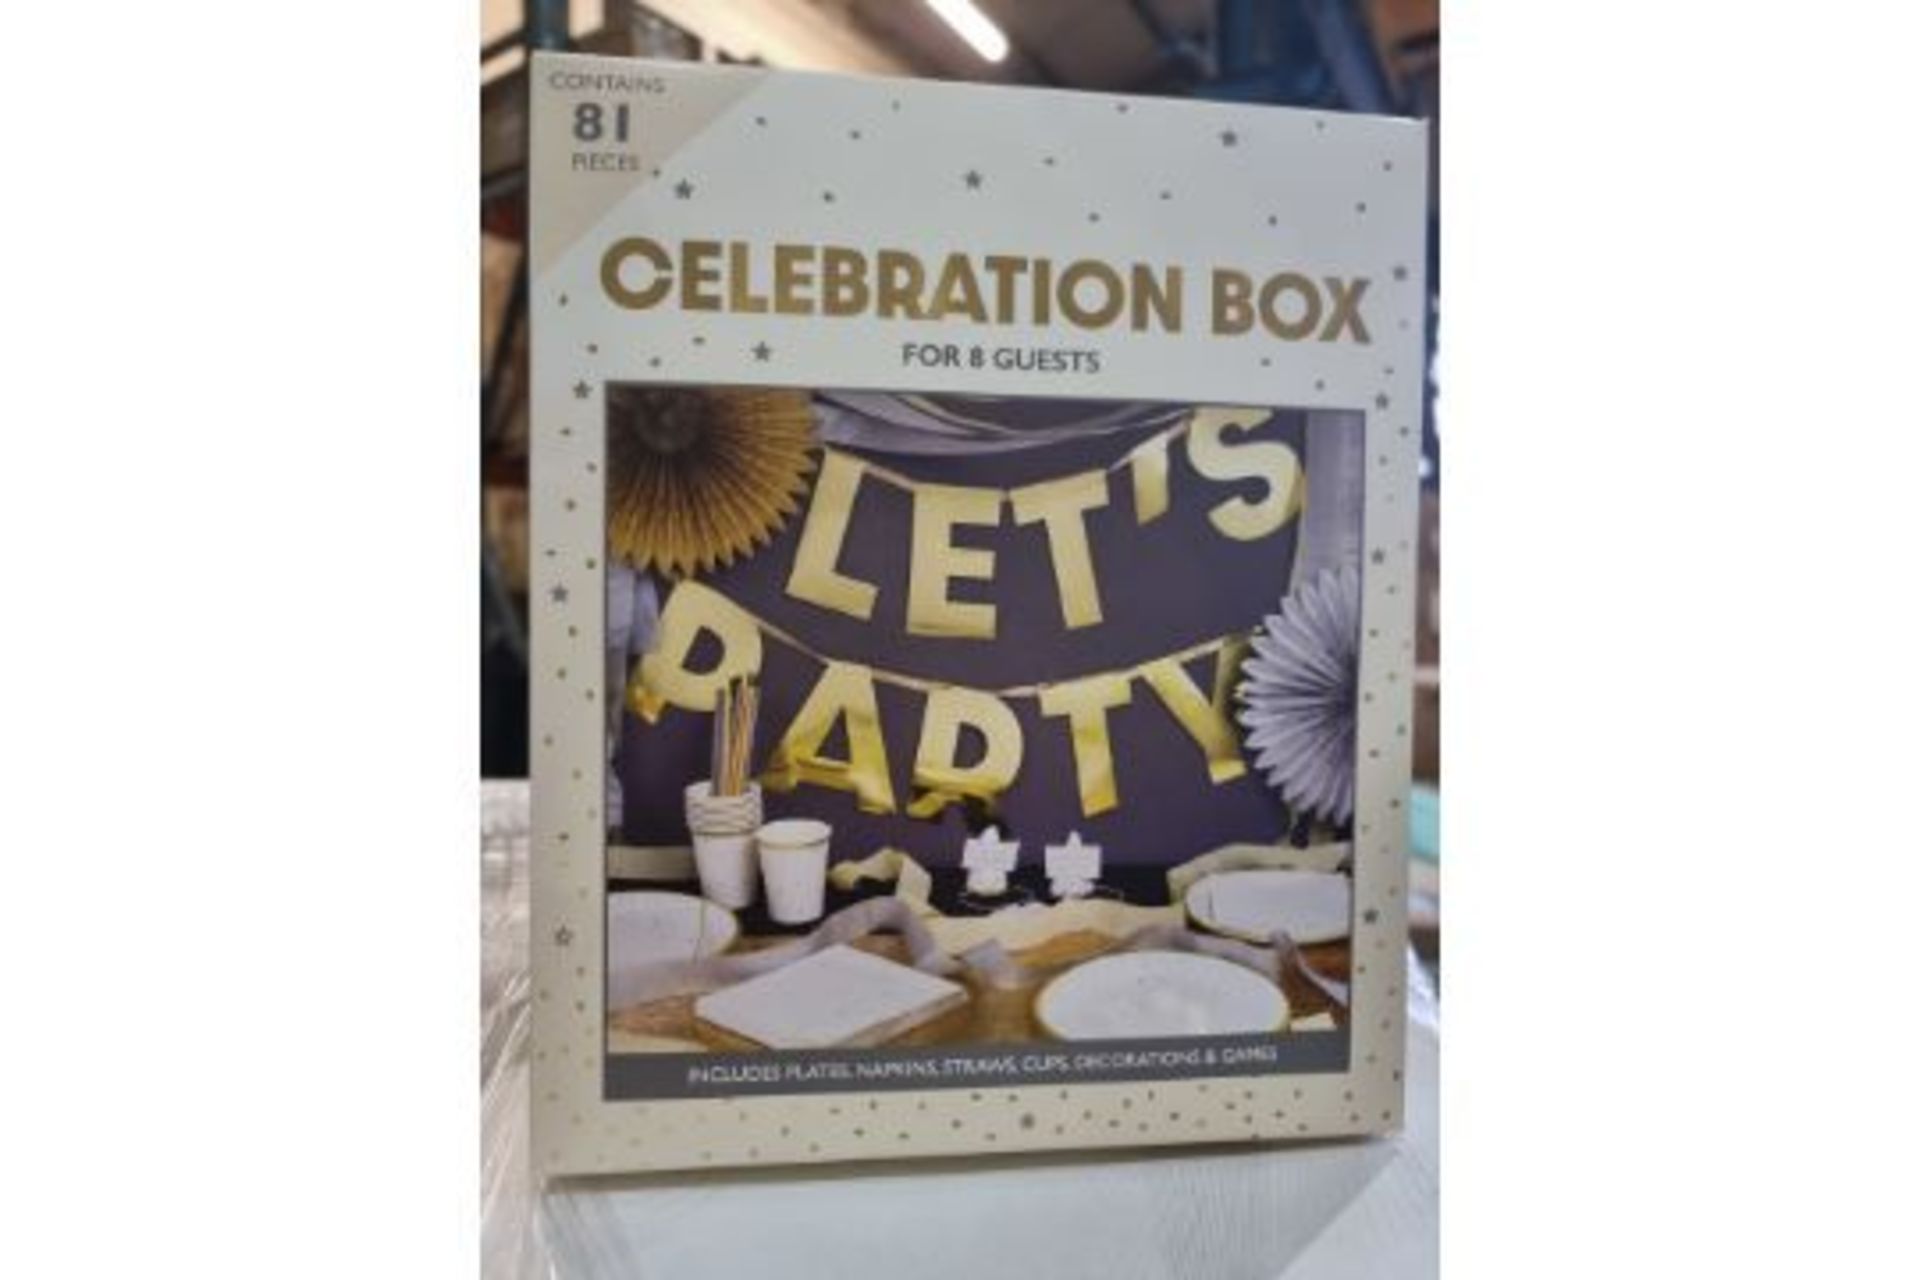 PALLET TO CONTAIN 108 x NEW 81 PIECE CELEBRATION BOXES FOR 8 GUESTS. INCLUDES: PLATES, NAPKINS,